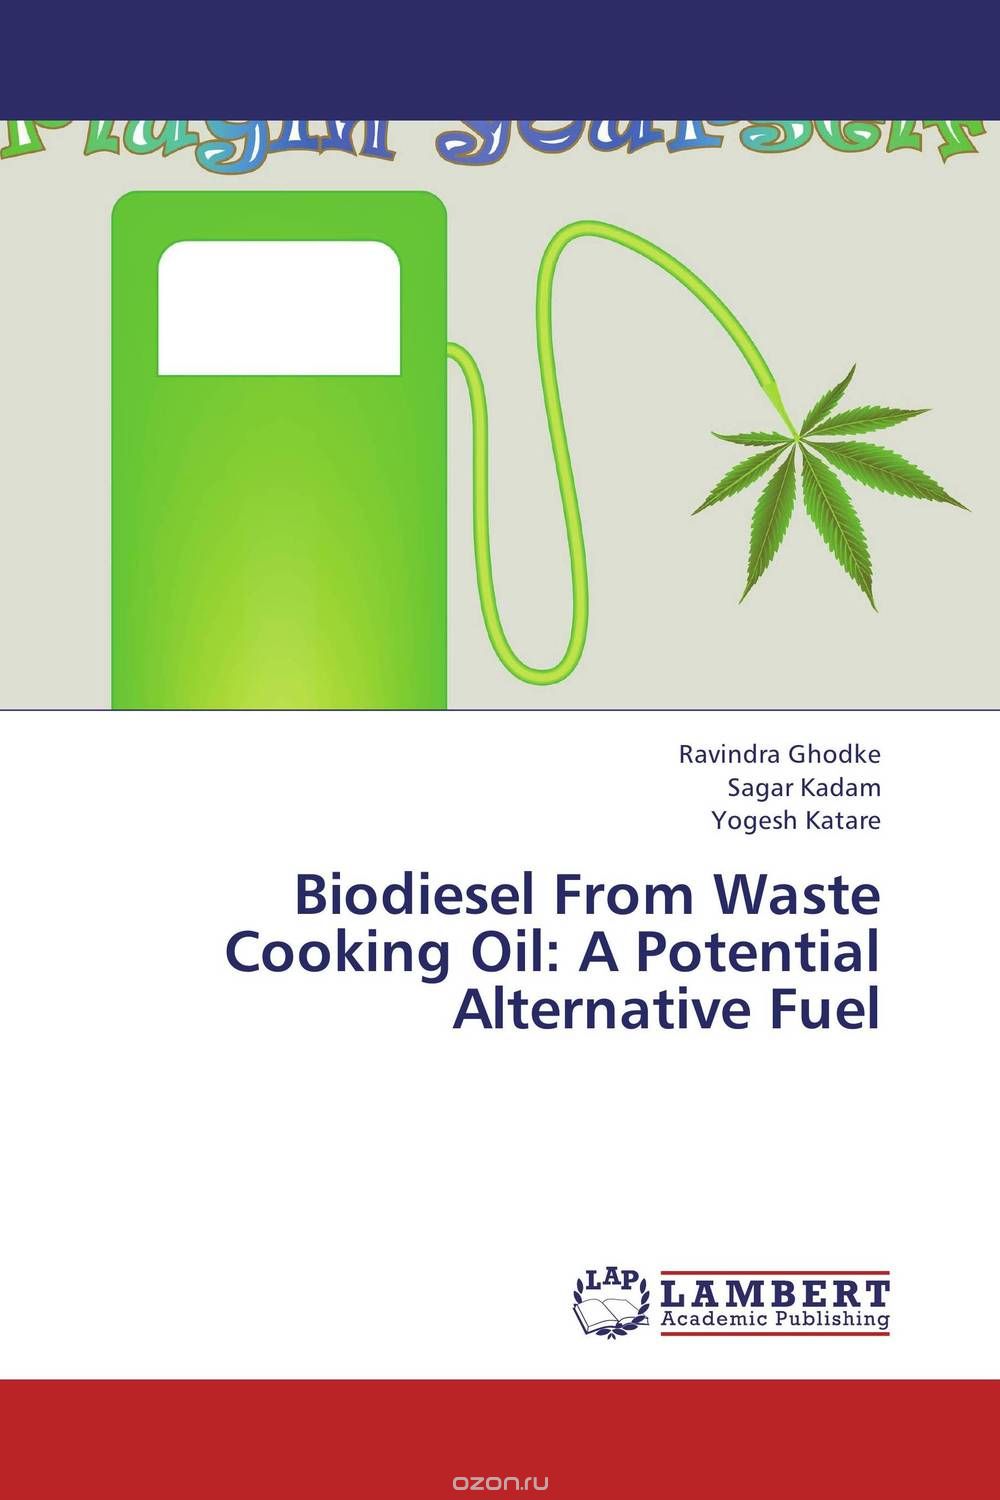 Biodiesel From Waste Cooking Oil: A Potential Alternative Fuel